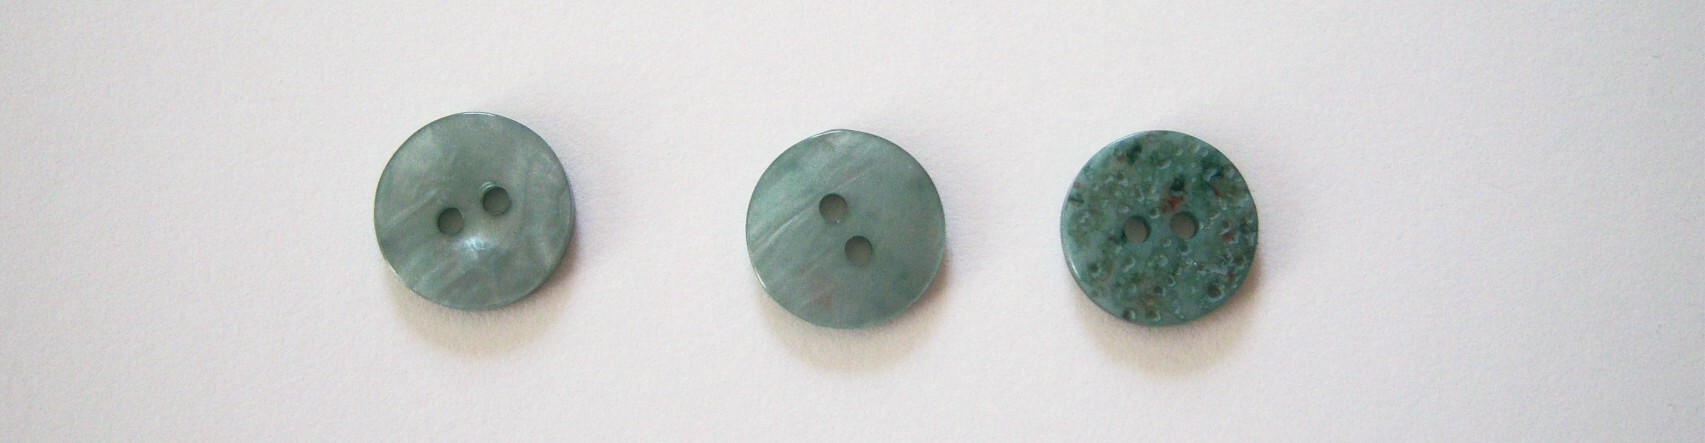 Dusty Green Pearlized 5/8" Poly 2 Hole Button